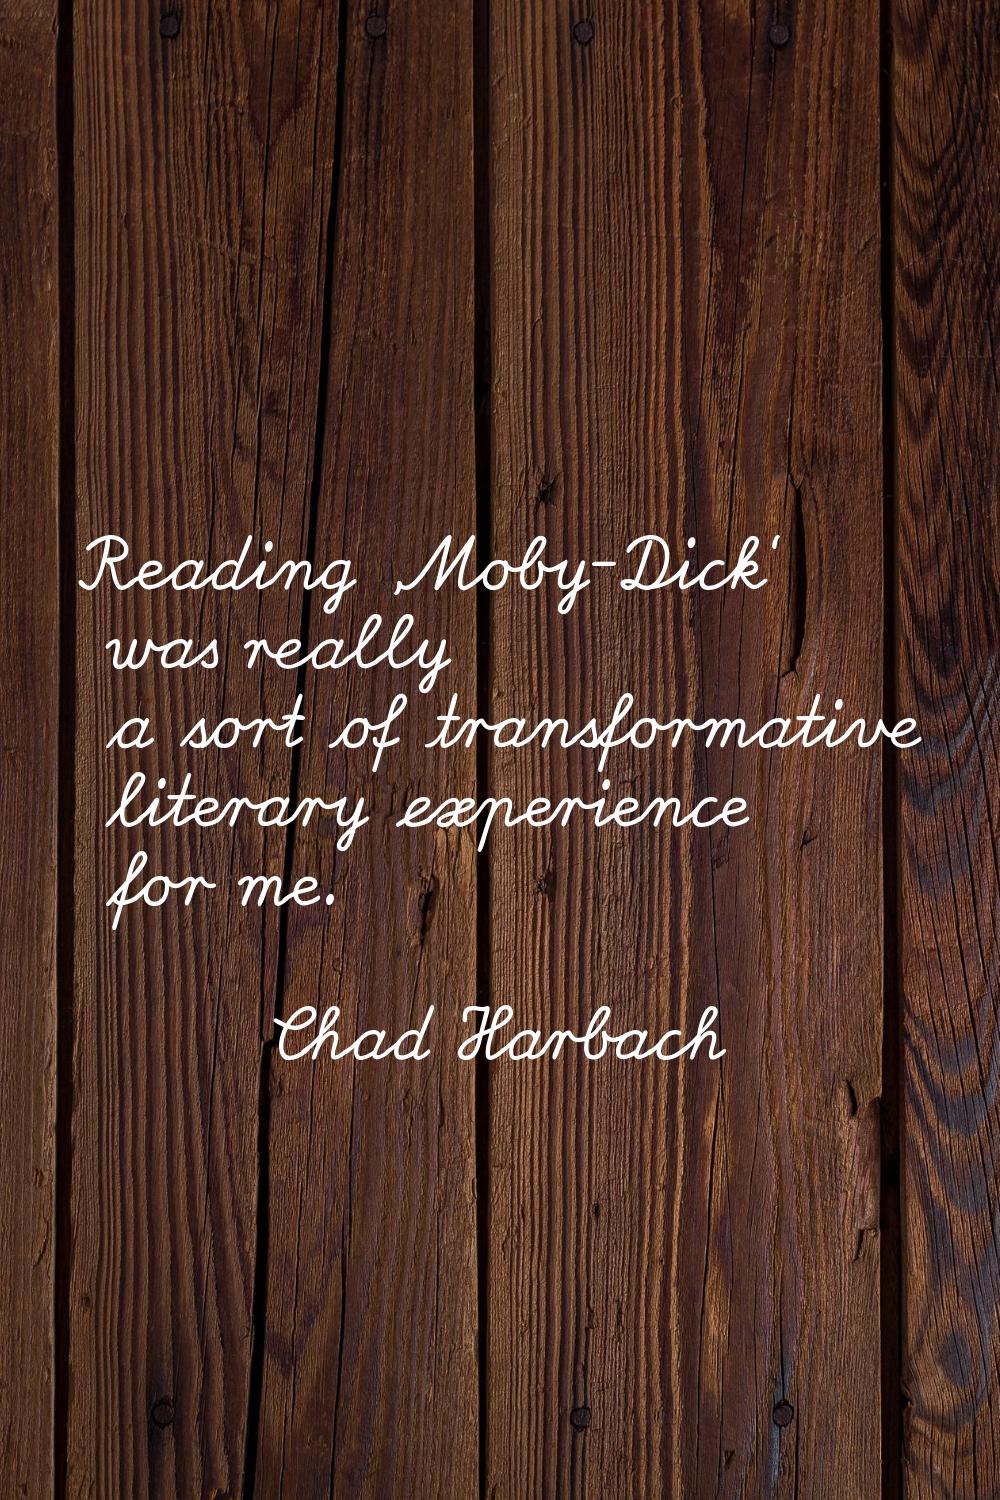 Reading 'Moby-Dick' was really a sort of transformative literary experience for me.